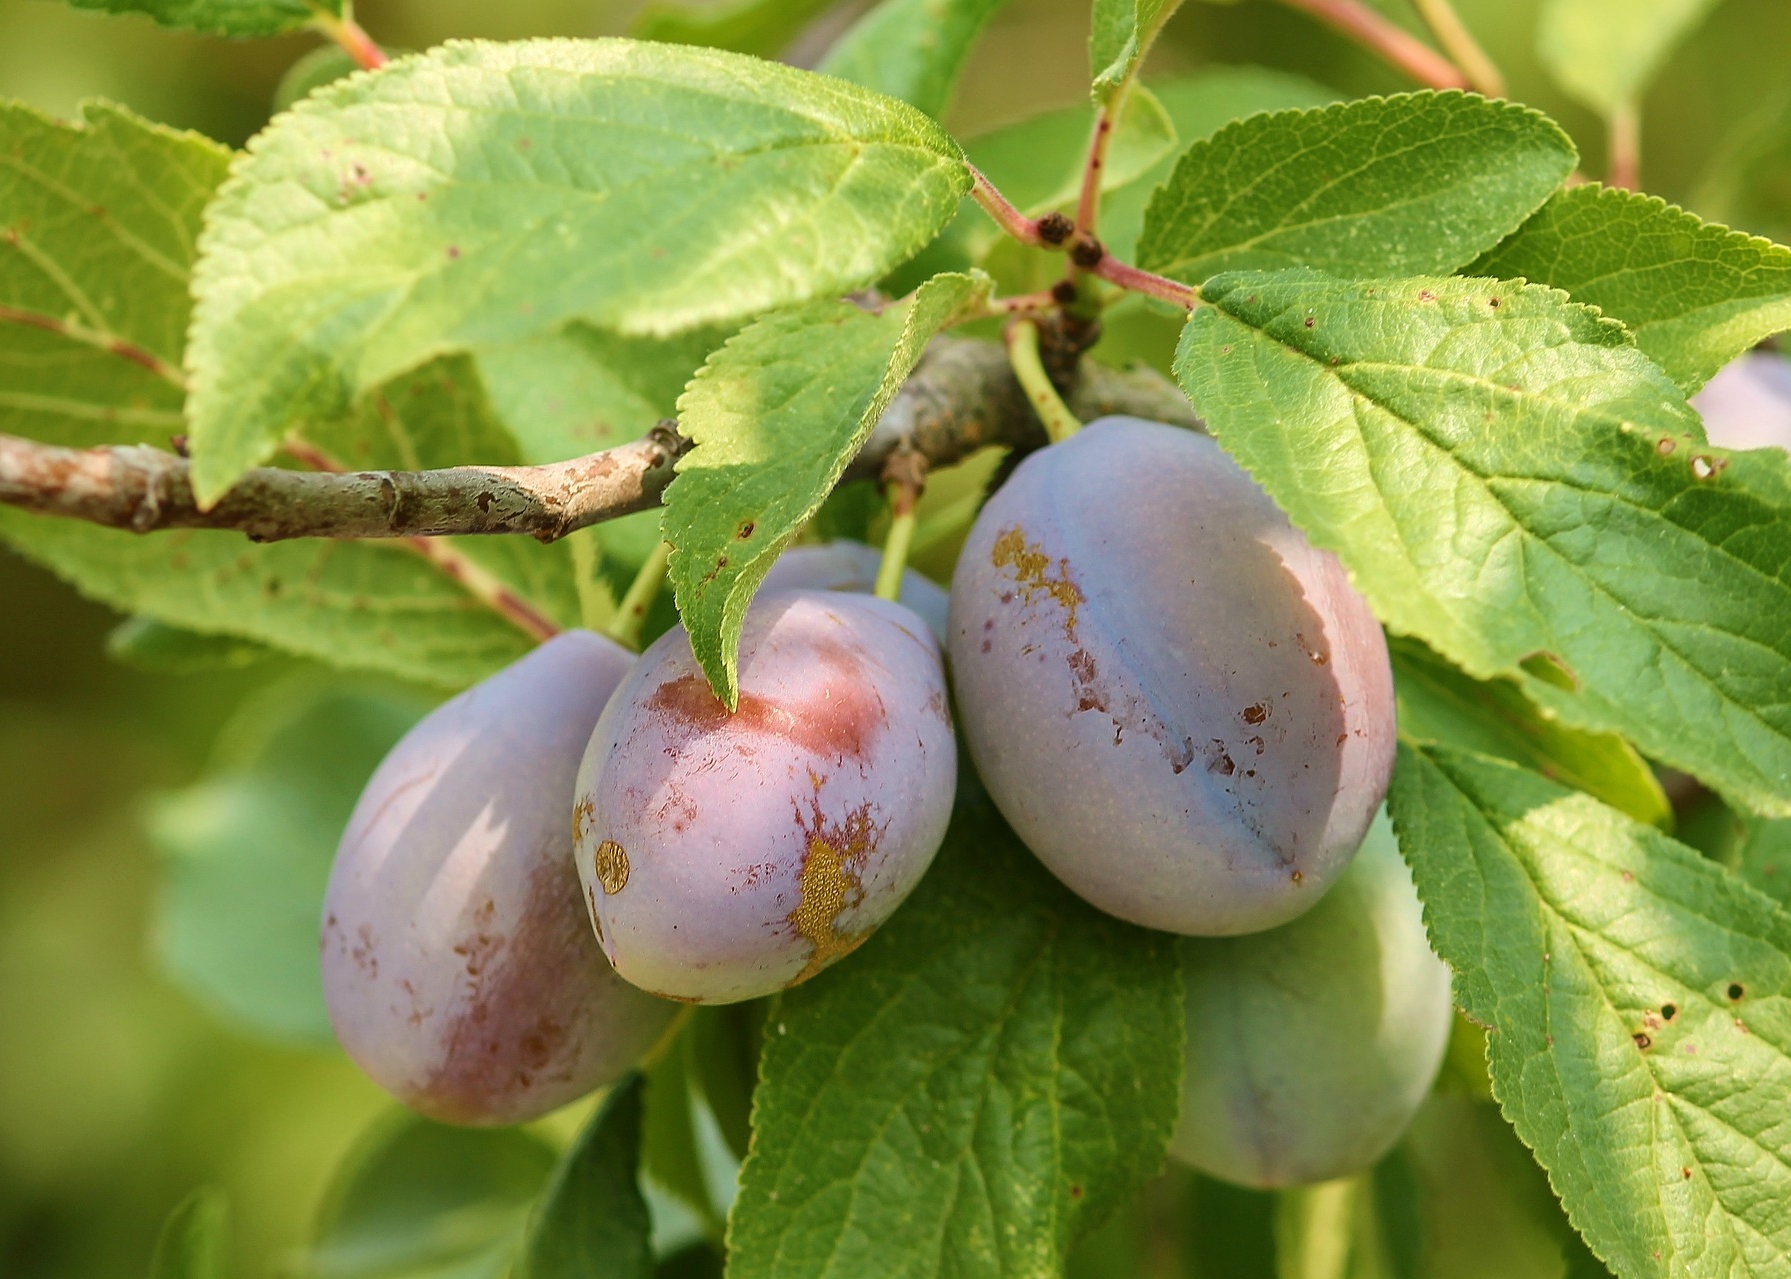 Plums How To Plant And Grow Plum Trees In Your Garden The Old Farmer S Almanac